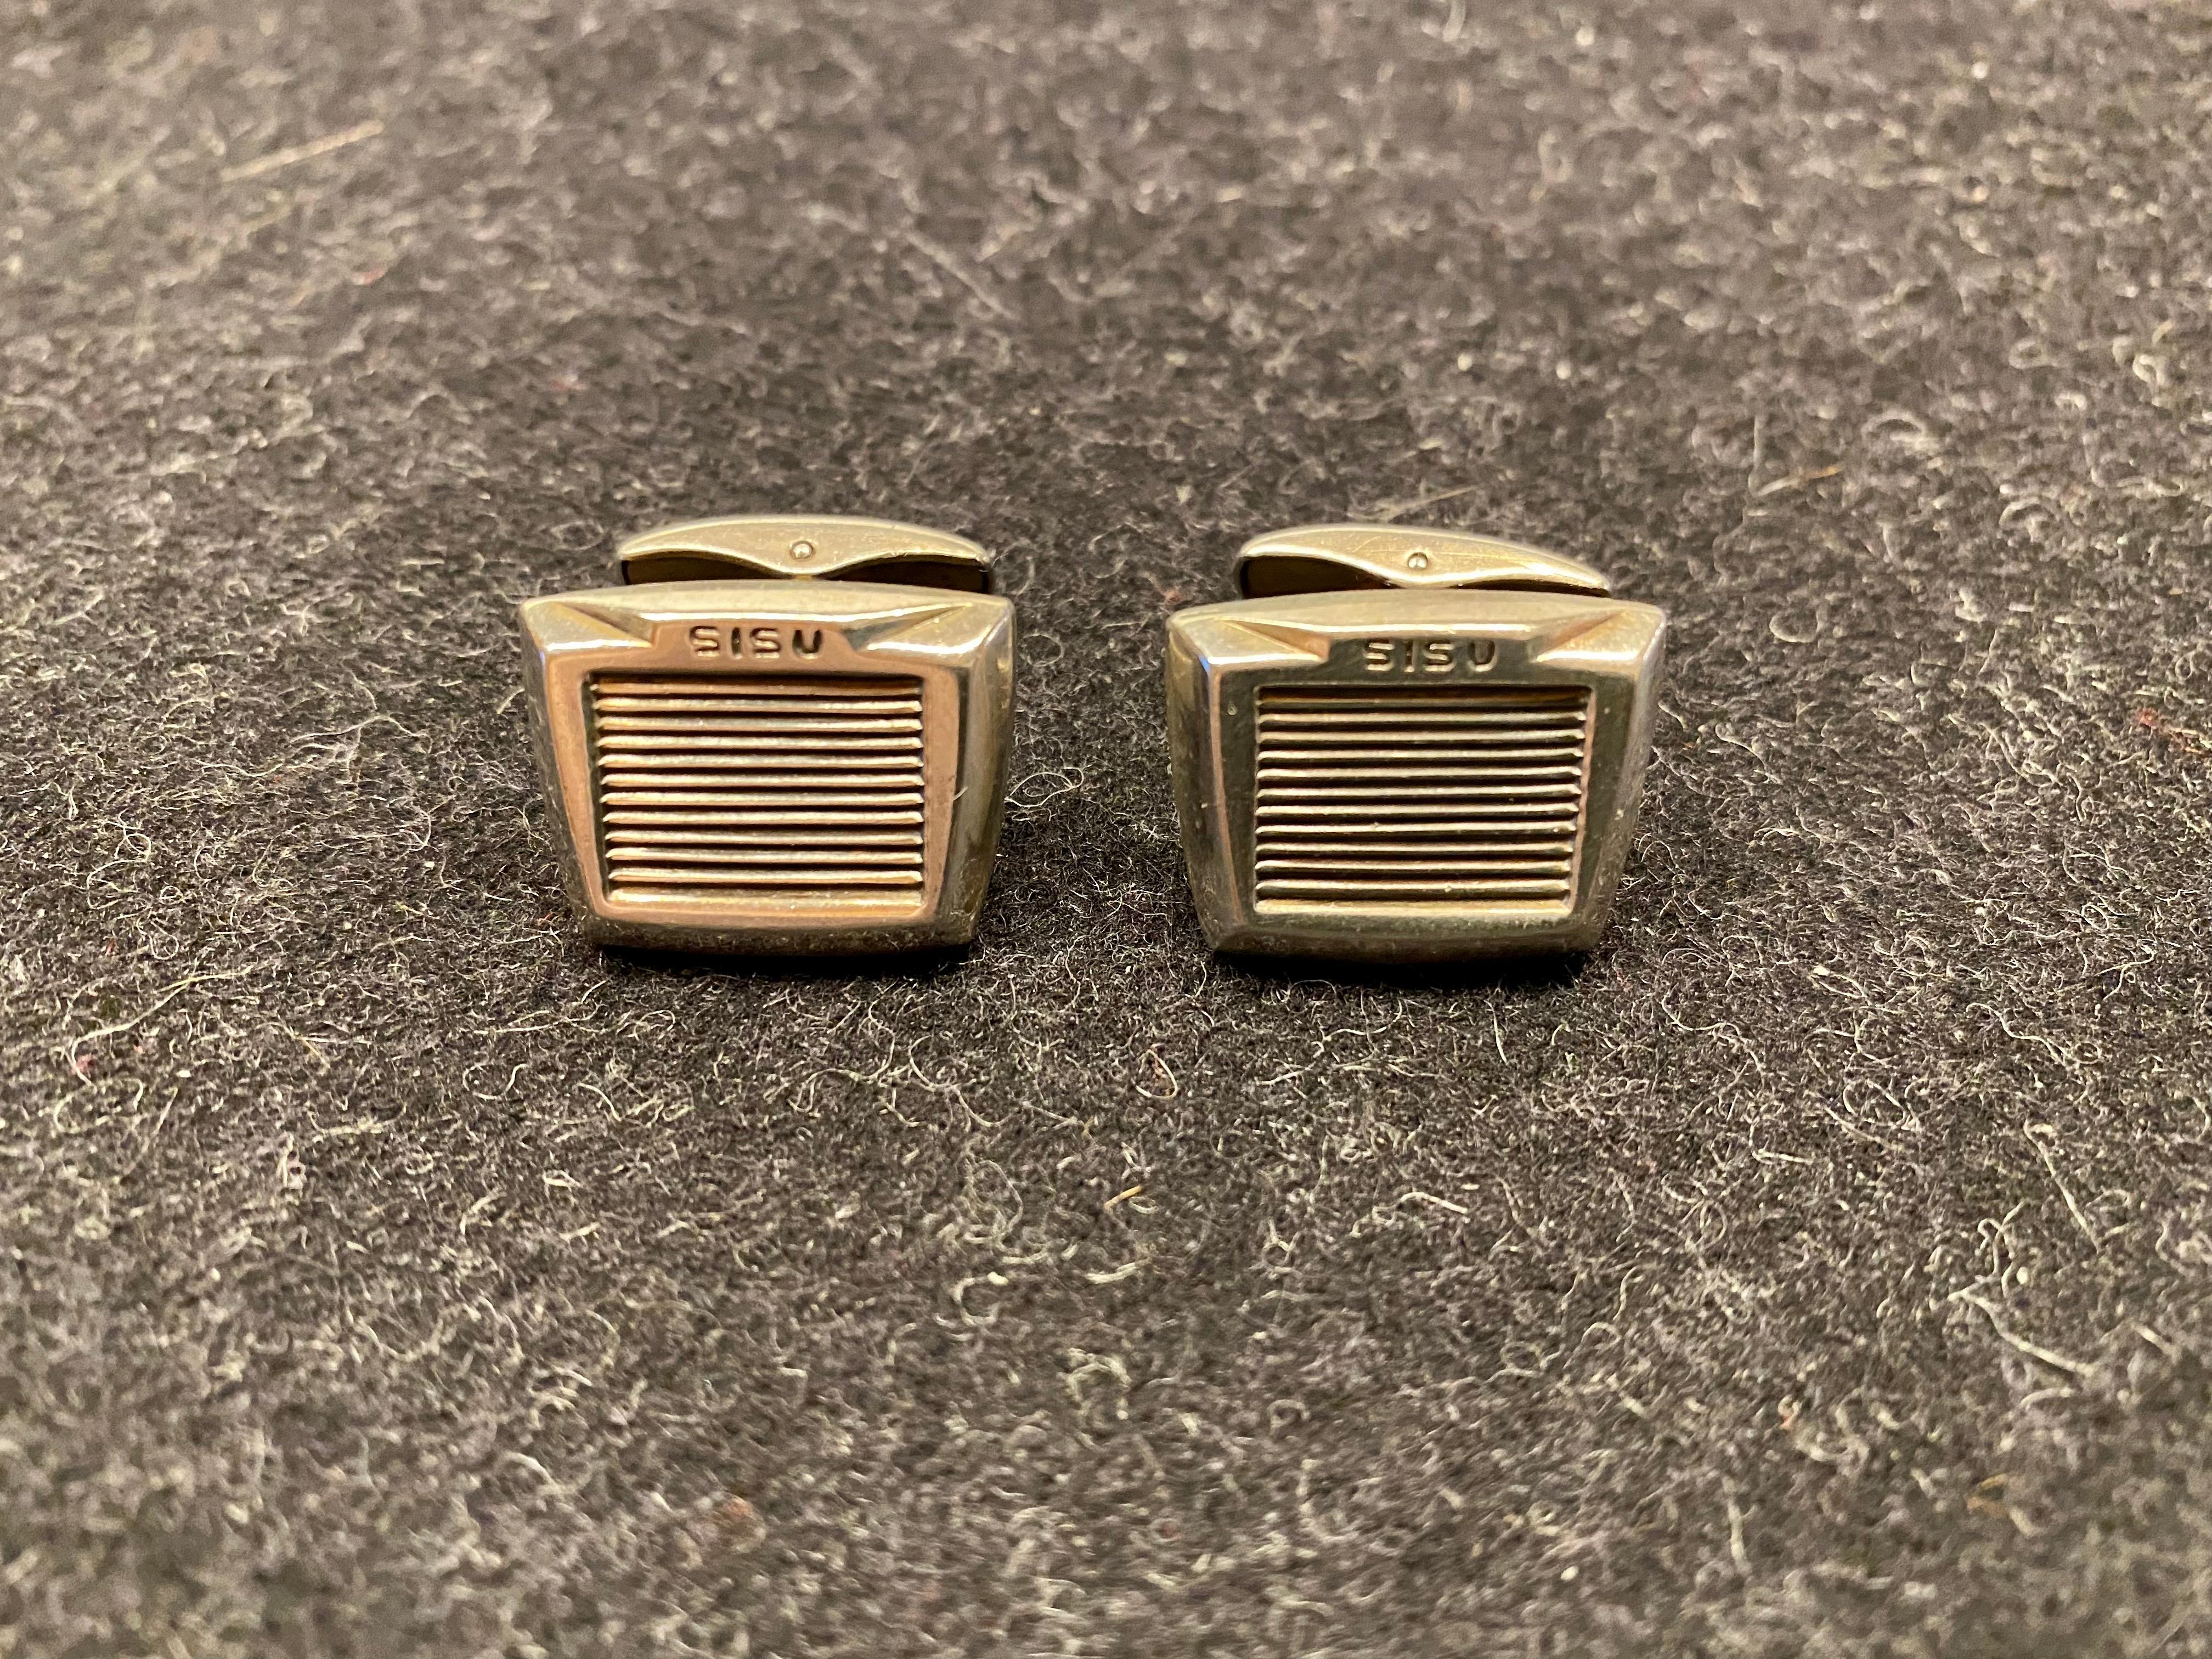 Silver Cufflinks Finland 1963 
Here's A Truck Cufflinks For A Great Gift For A Man Or Woman
Turku Finland Alpo Tammi AKT 1959-1967
Sisu,
1963
830 H Silver
No engravings.
Great cufflinks.

Sisu Is a Finnish Truck.

Below is historical information